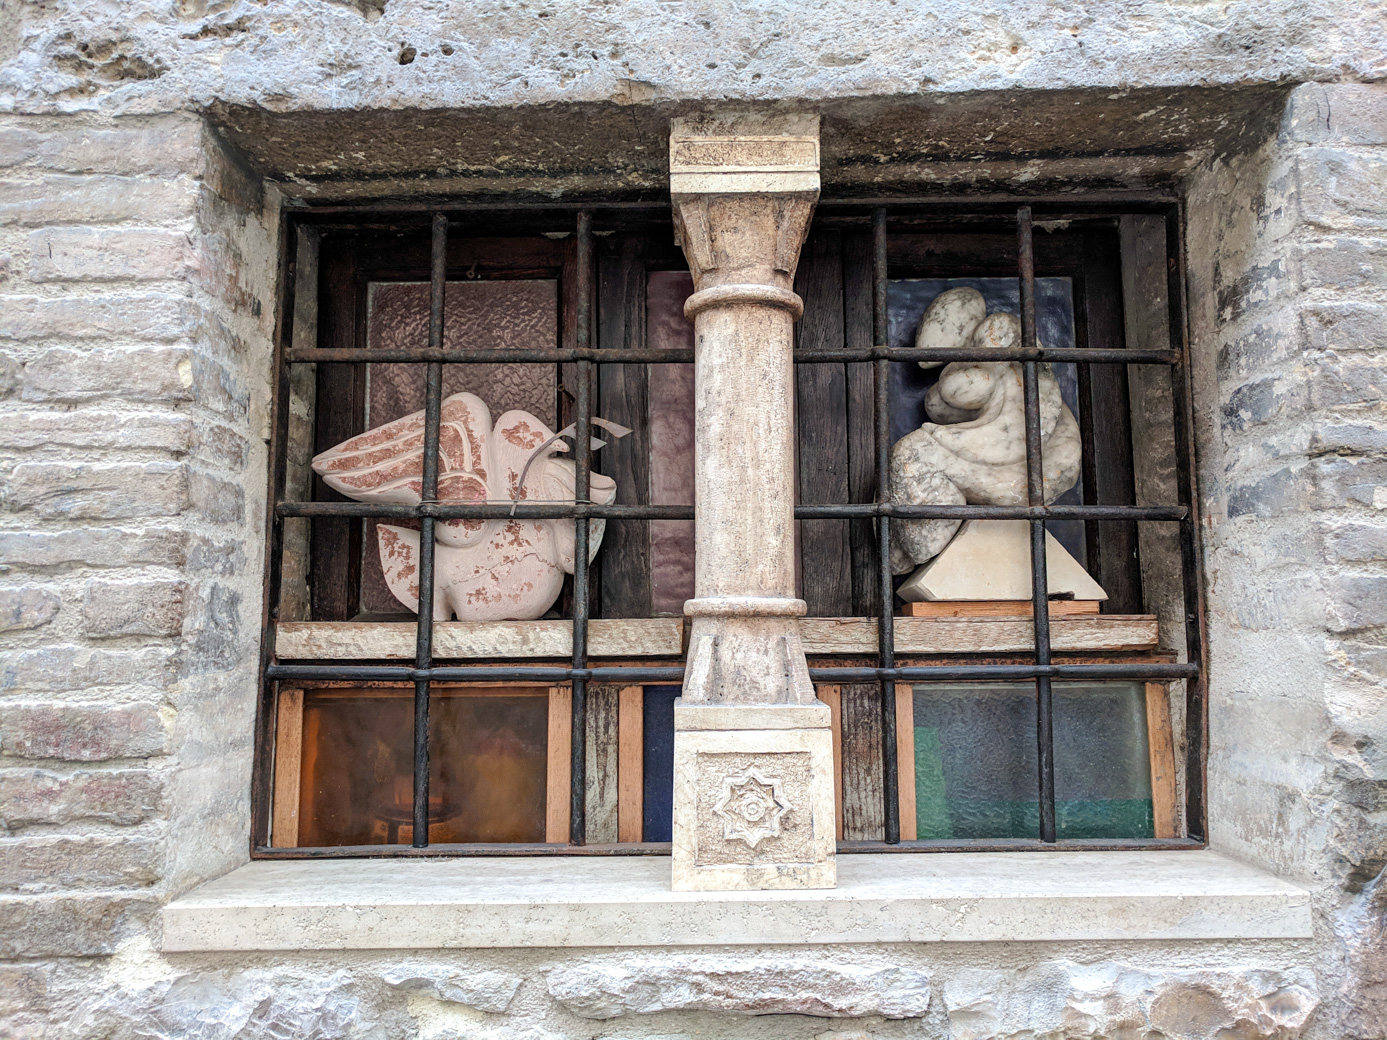 A window in Assisi